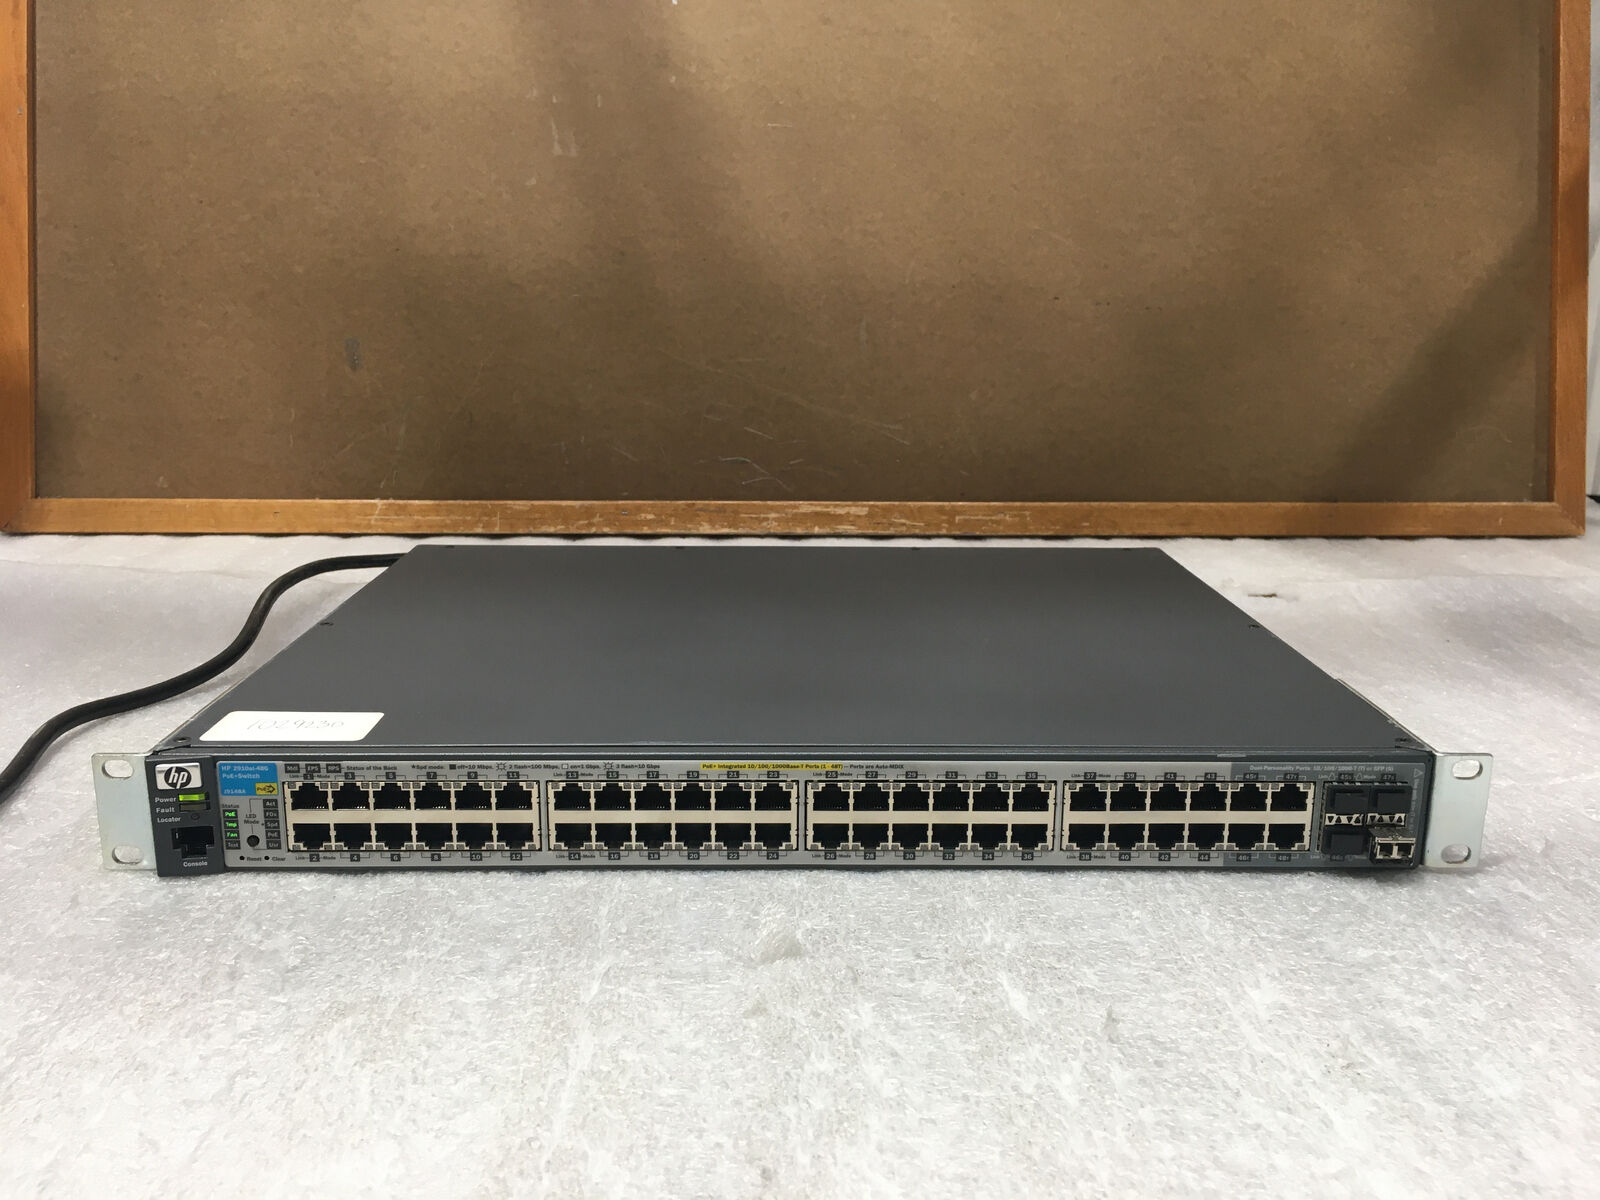 HP ProCurve 2910al-48G-PoE+ Gigabit Ethernet Switch J9148A *TESTED AND WORKING*